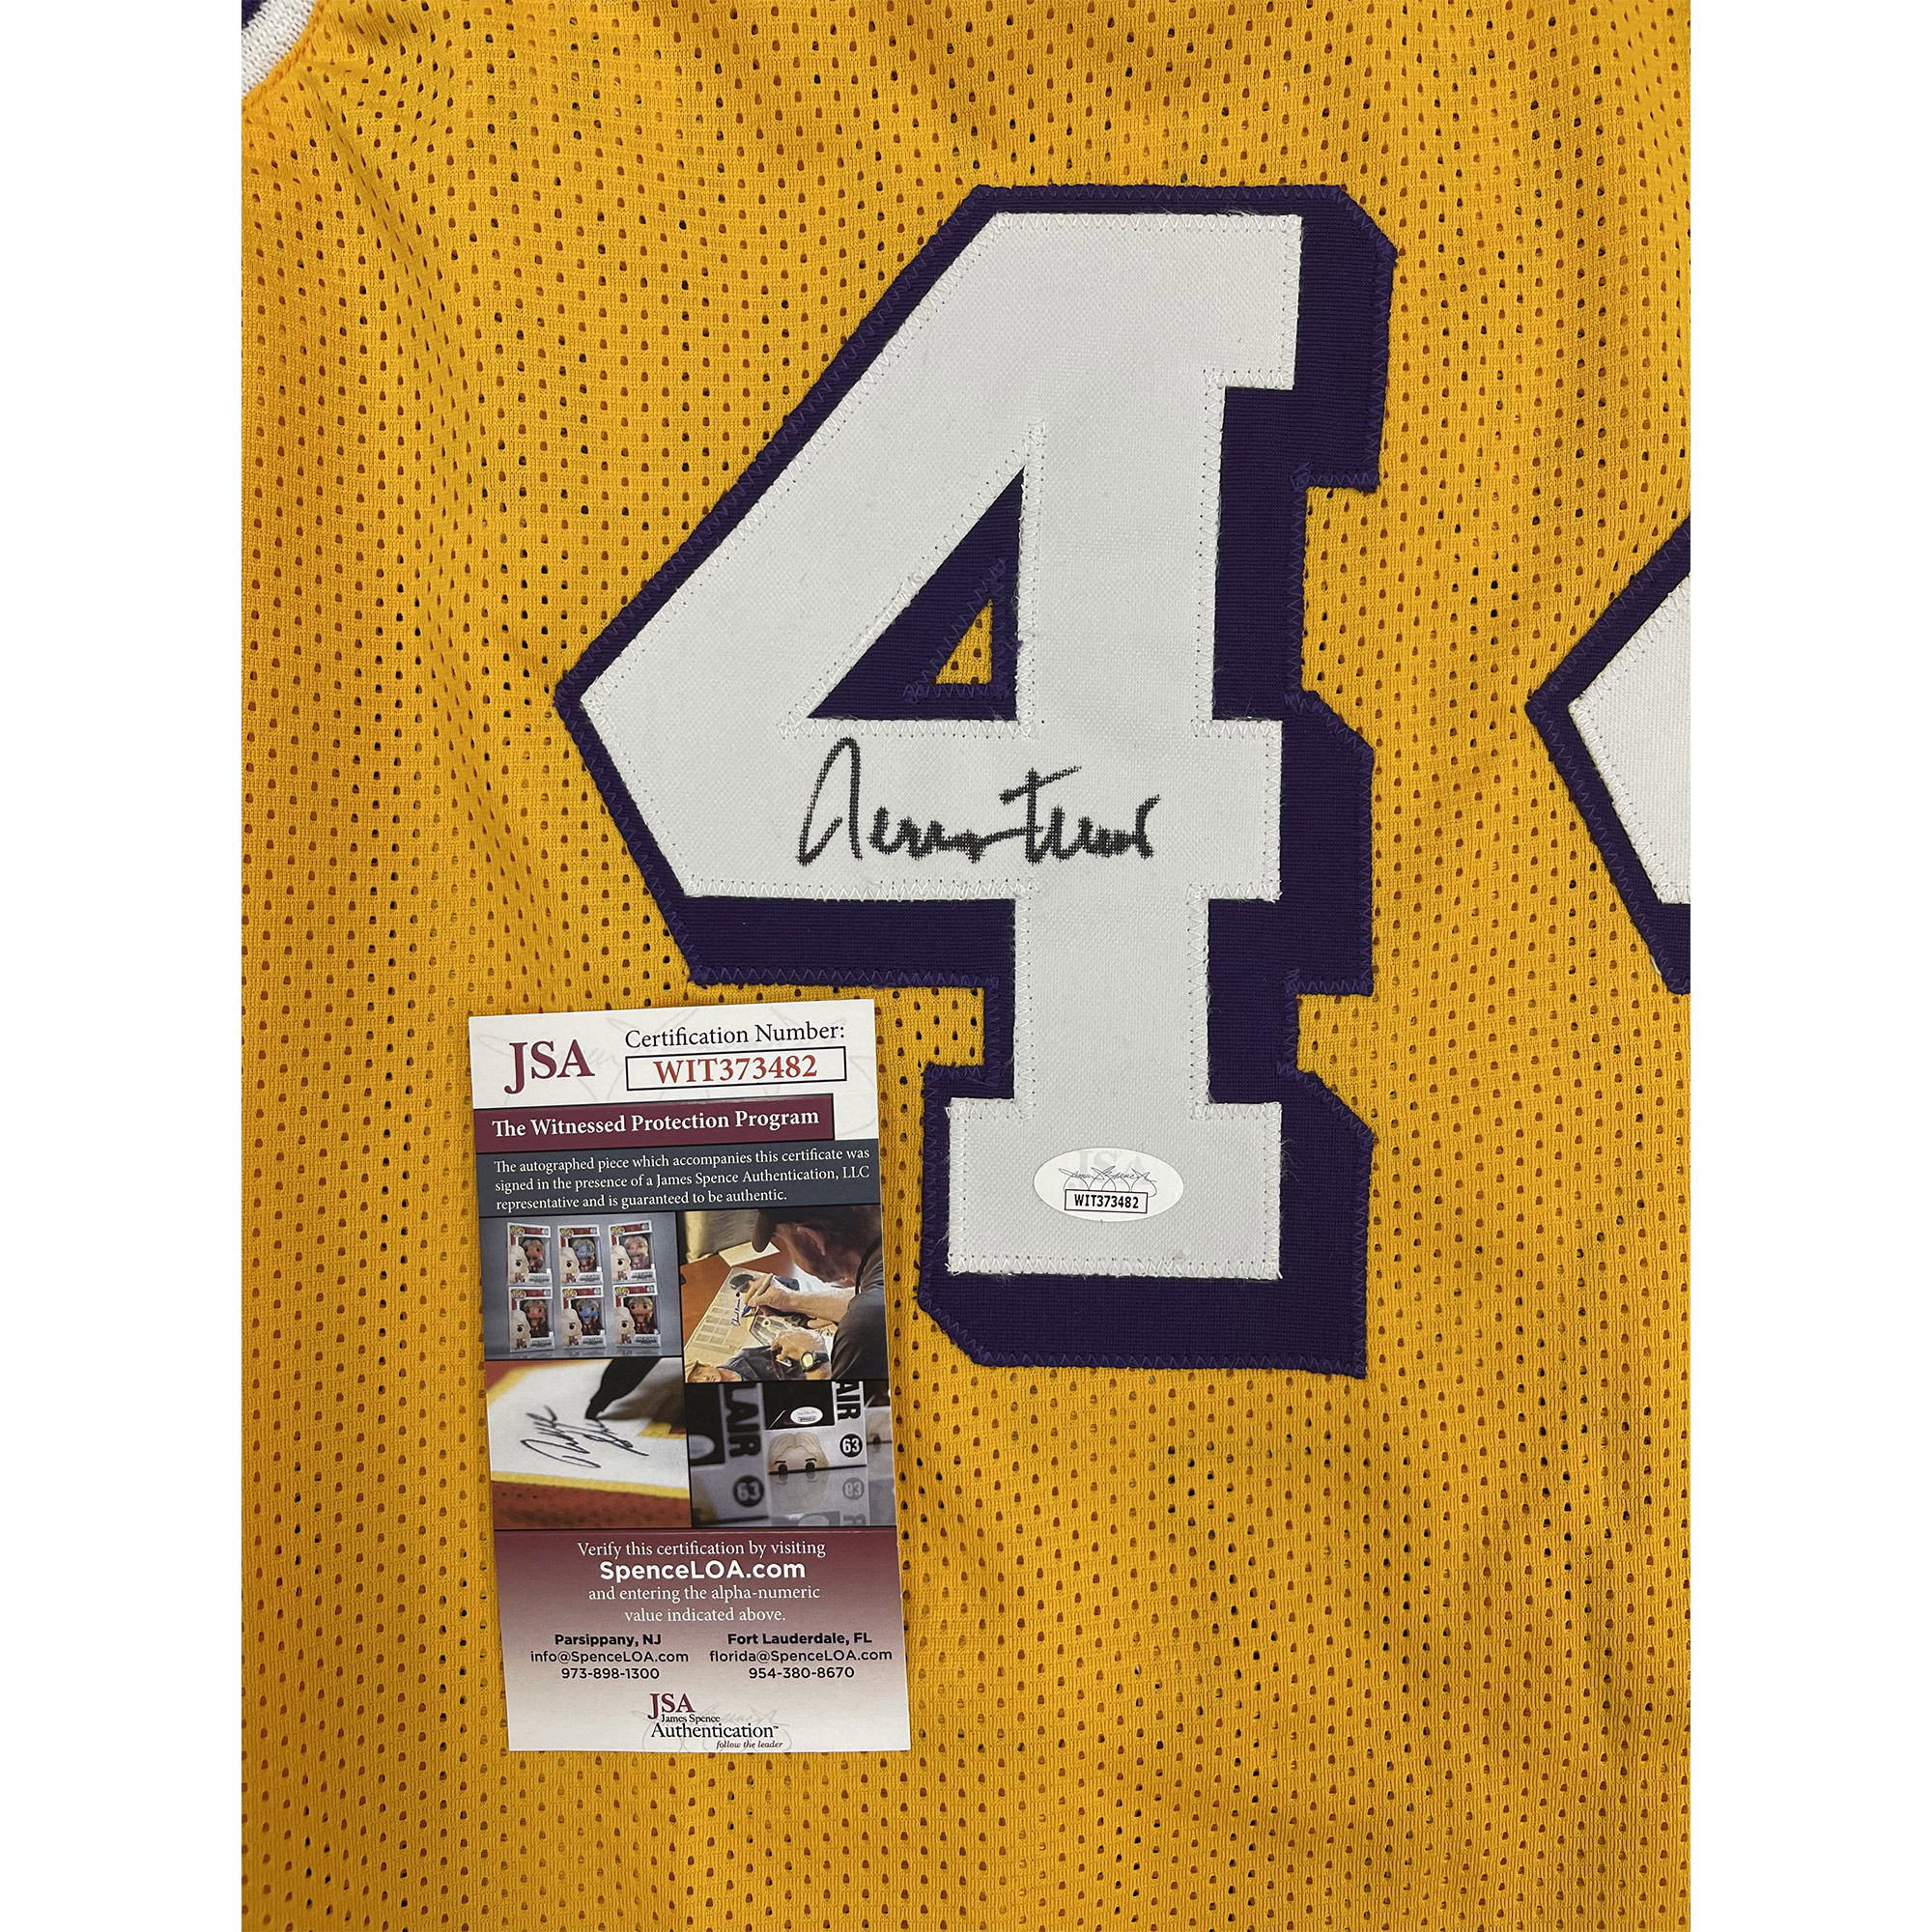 Basketball - Kobe Bryant Signed & Framed Panini Authentic Los Angeles  Lakers Jersey, Taylormade Memorabilia